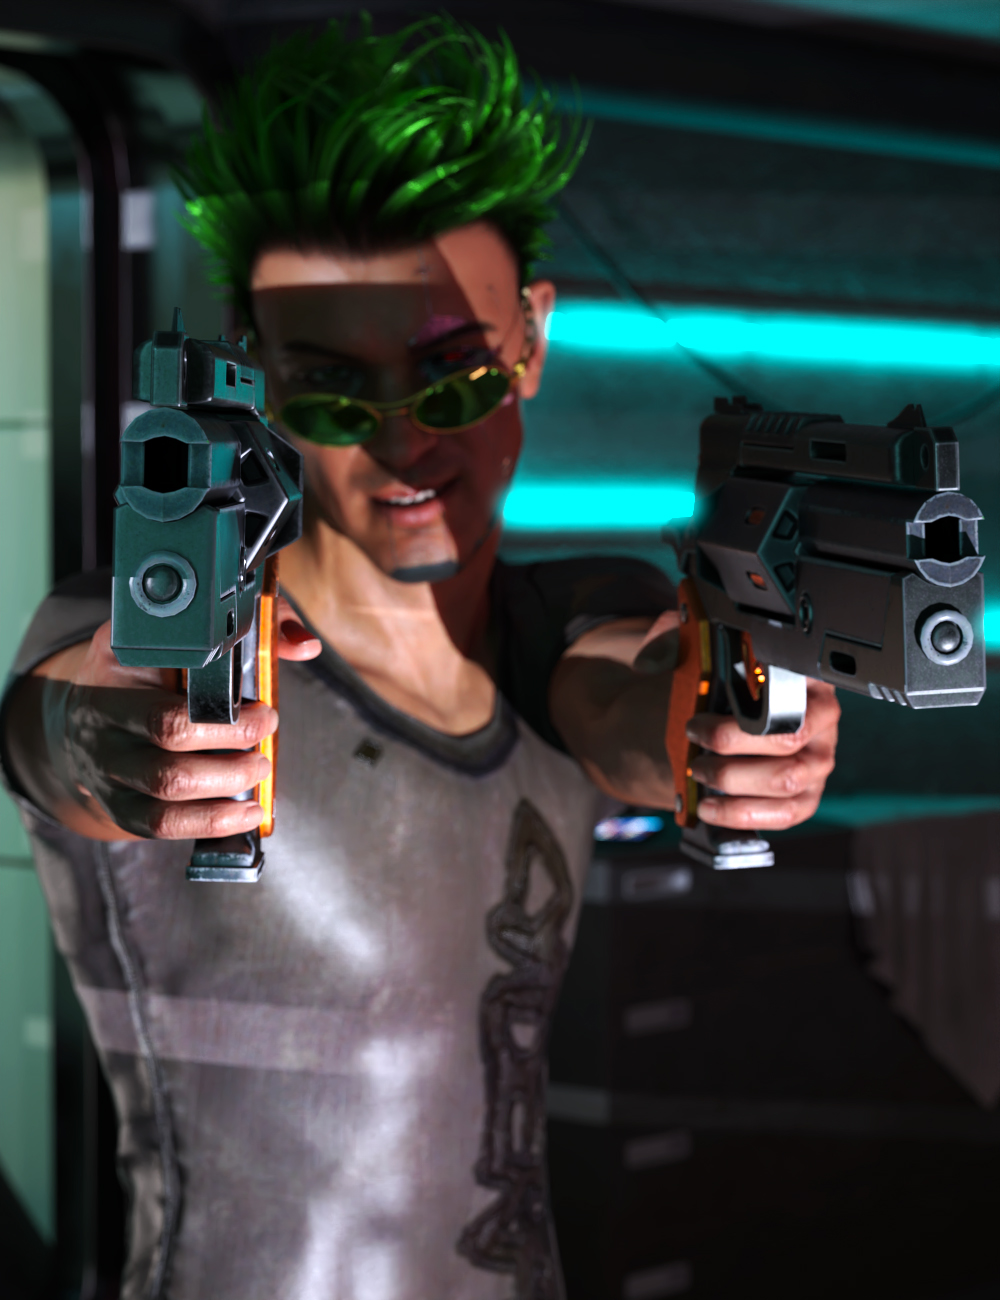 Cyberpunk Weapons by: Charlie, 3D Models by Daz 3D